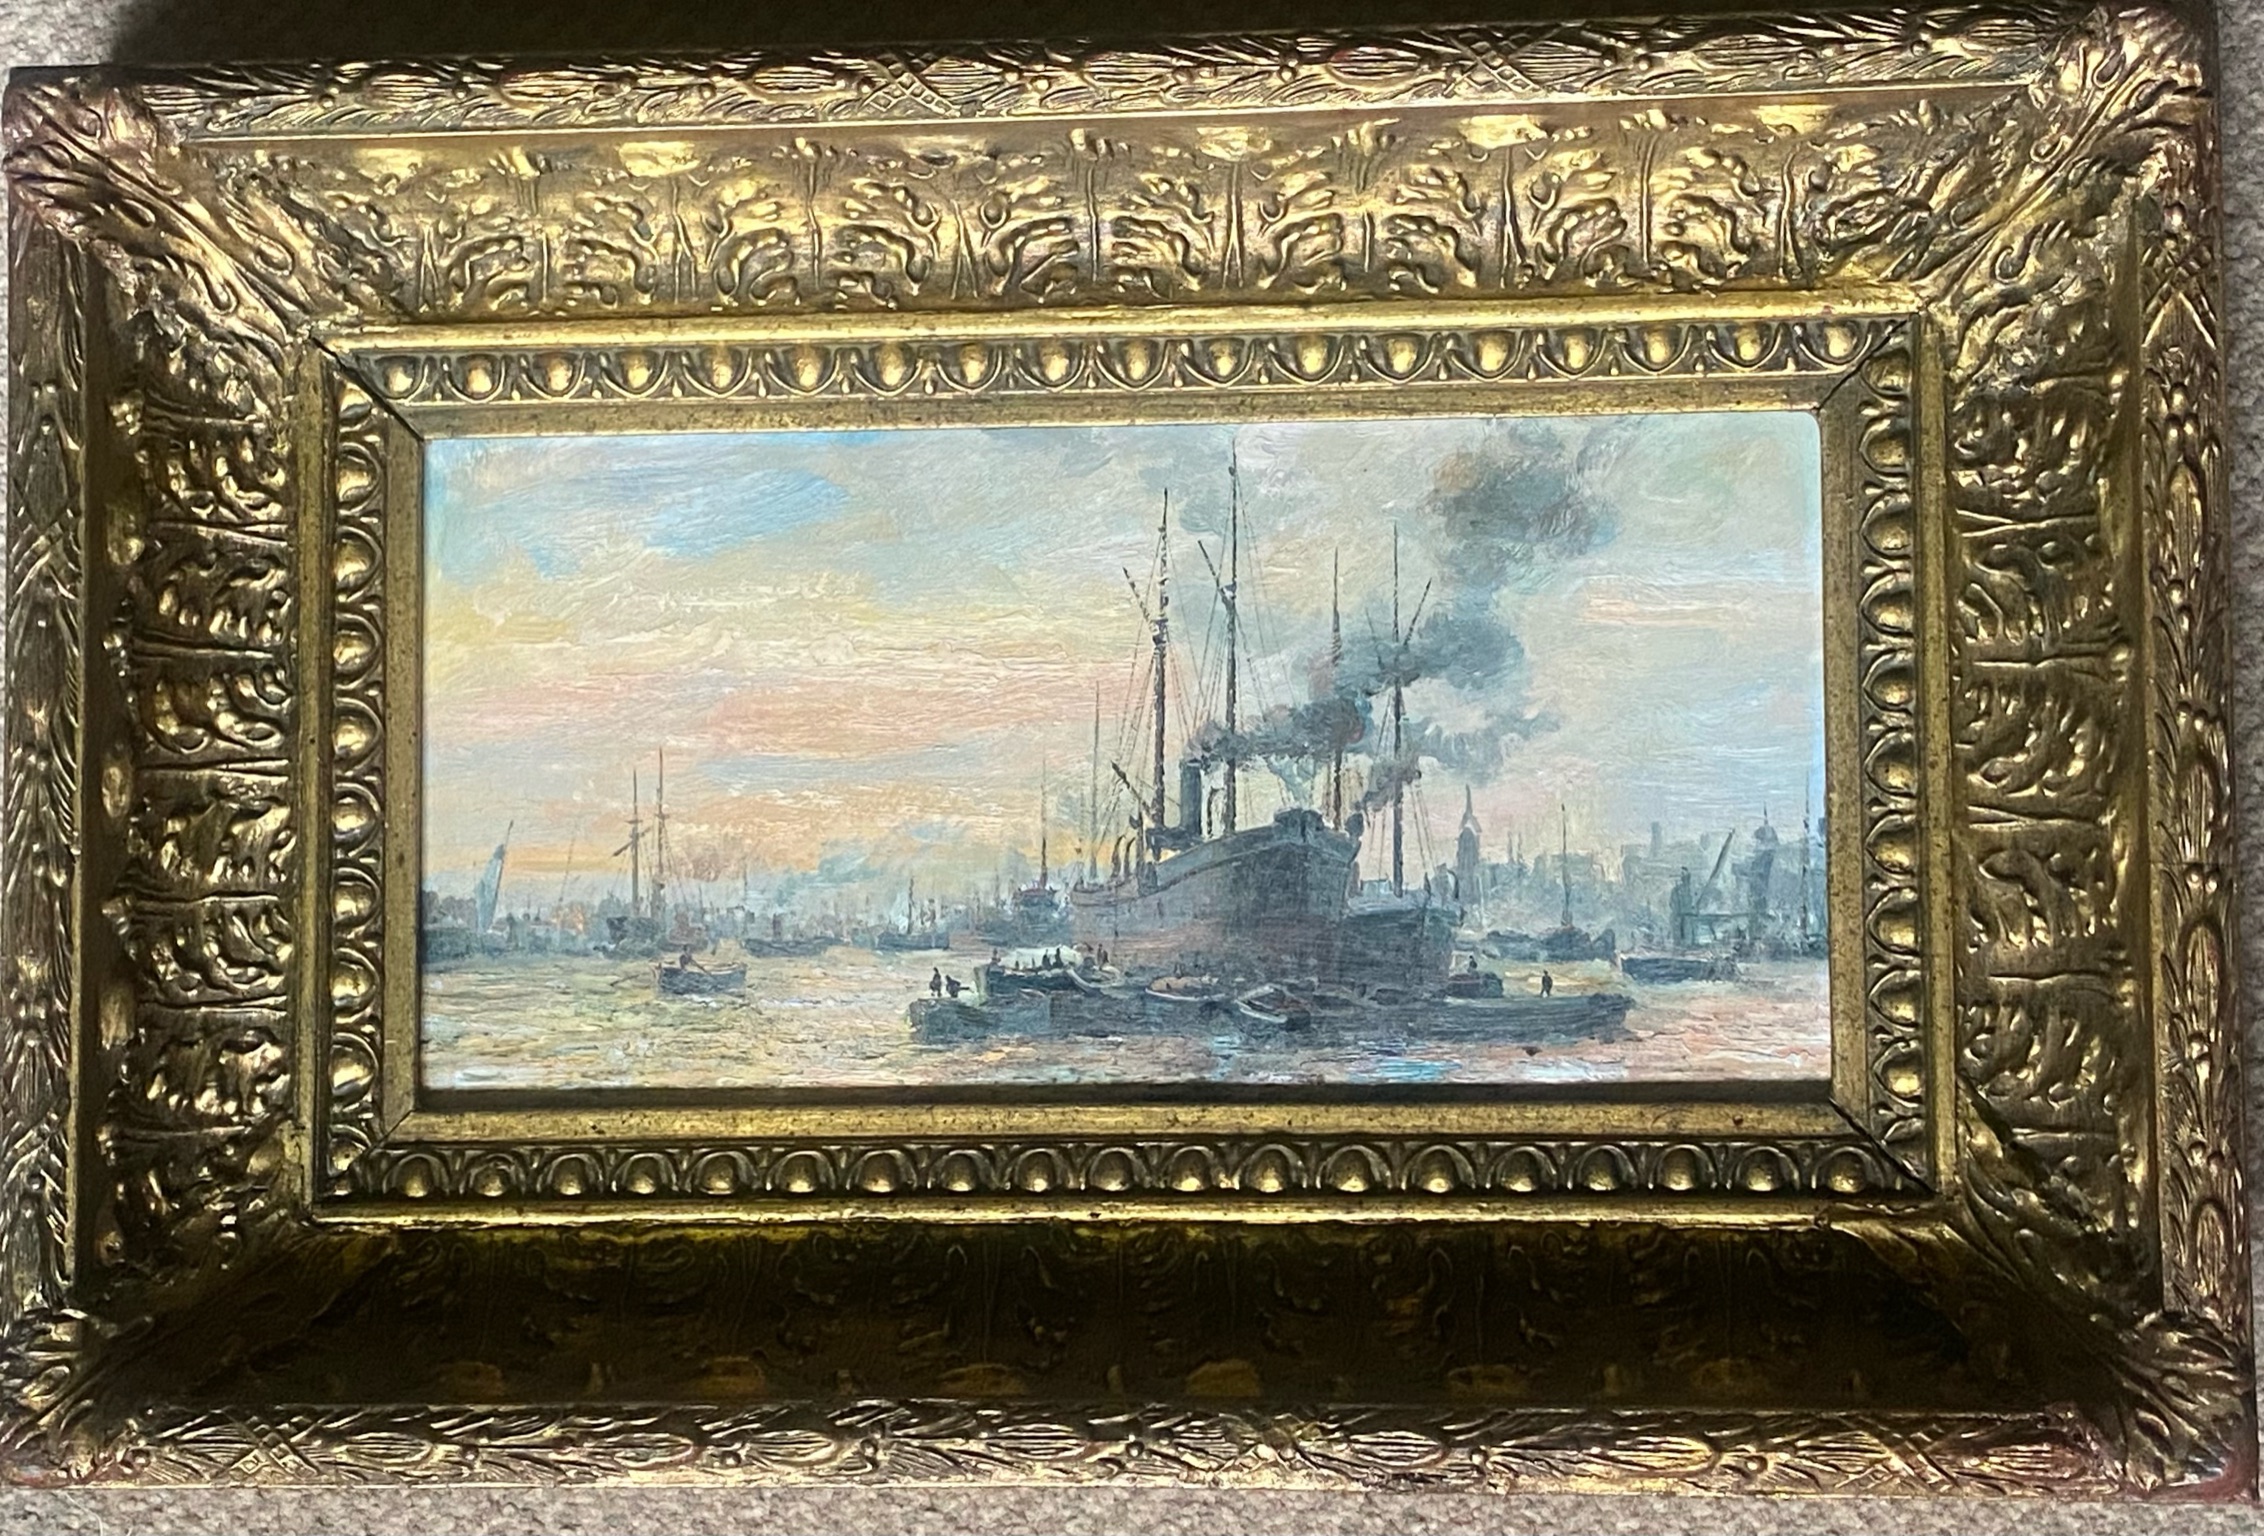 Original oil painting The Pool of London in the manner of Frederick William Scarborough - Image 2 of 2